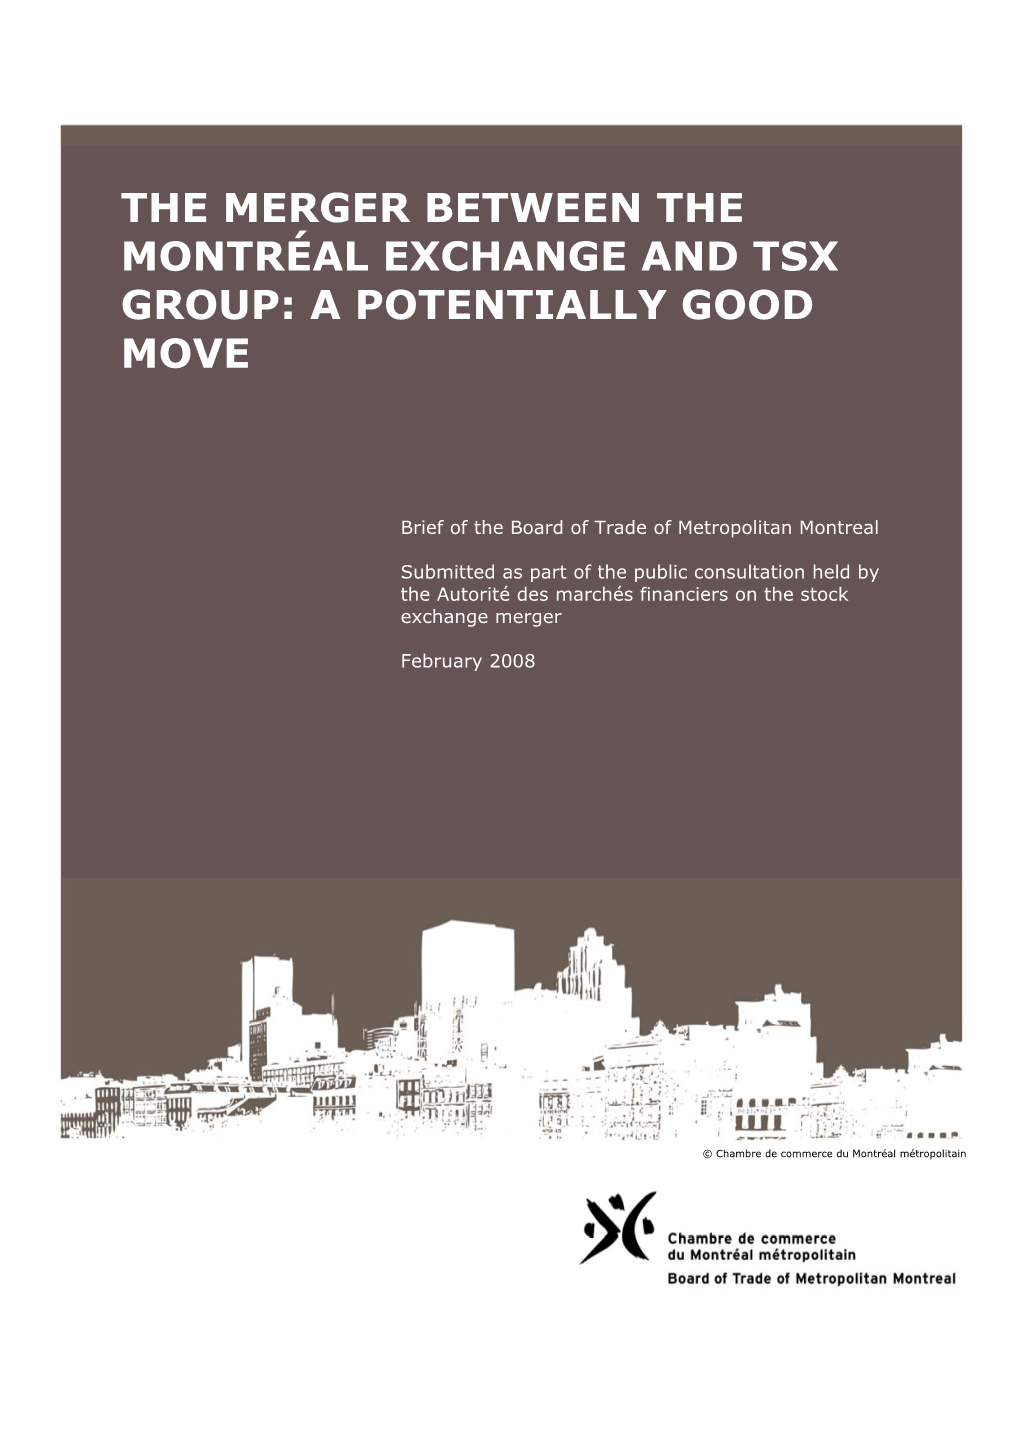 The Merger Between the Montréal Exchange and Tsx Group: a Potentially Good Move